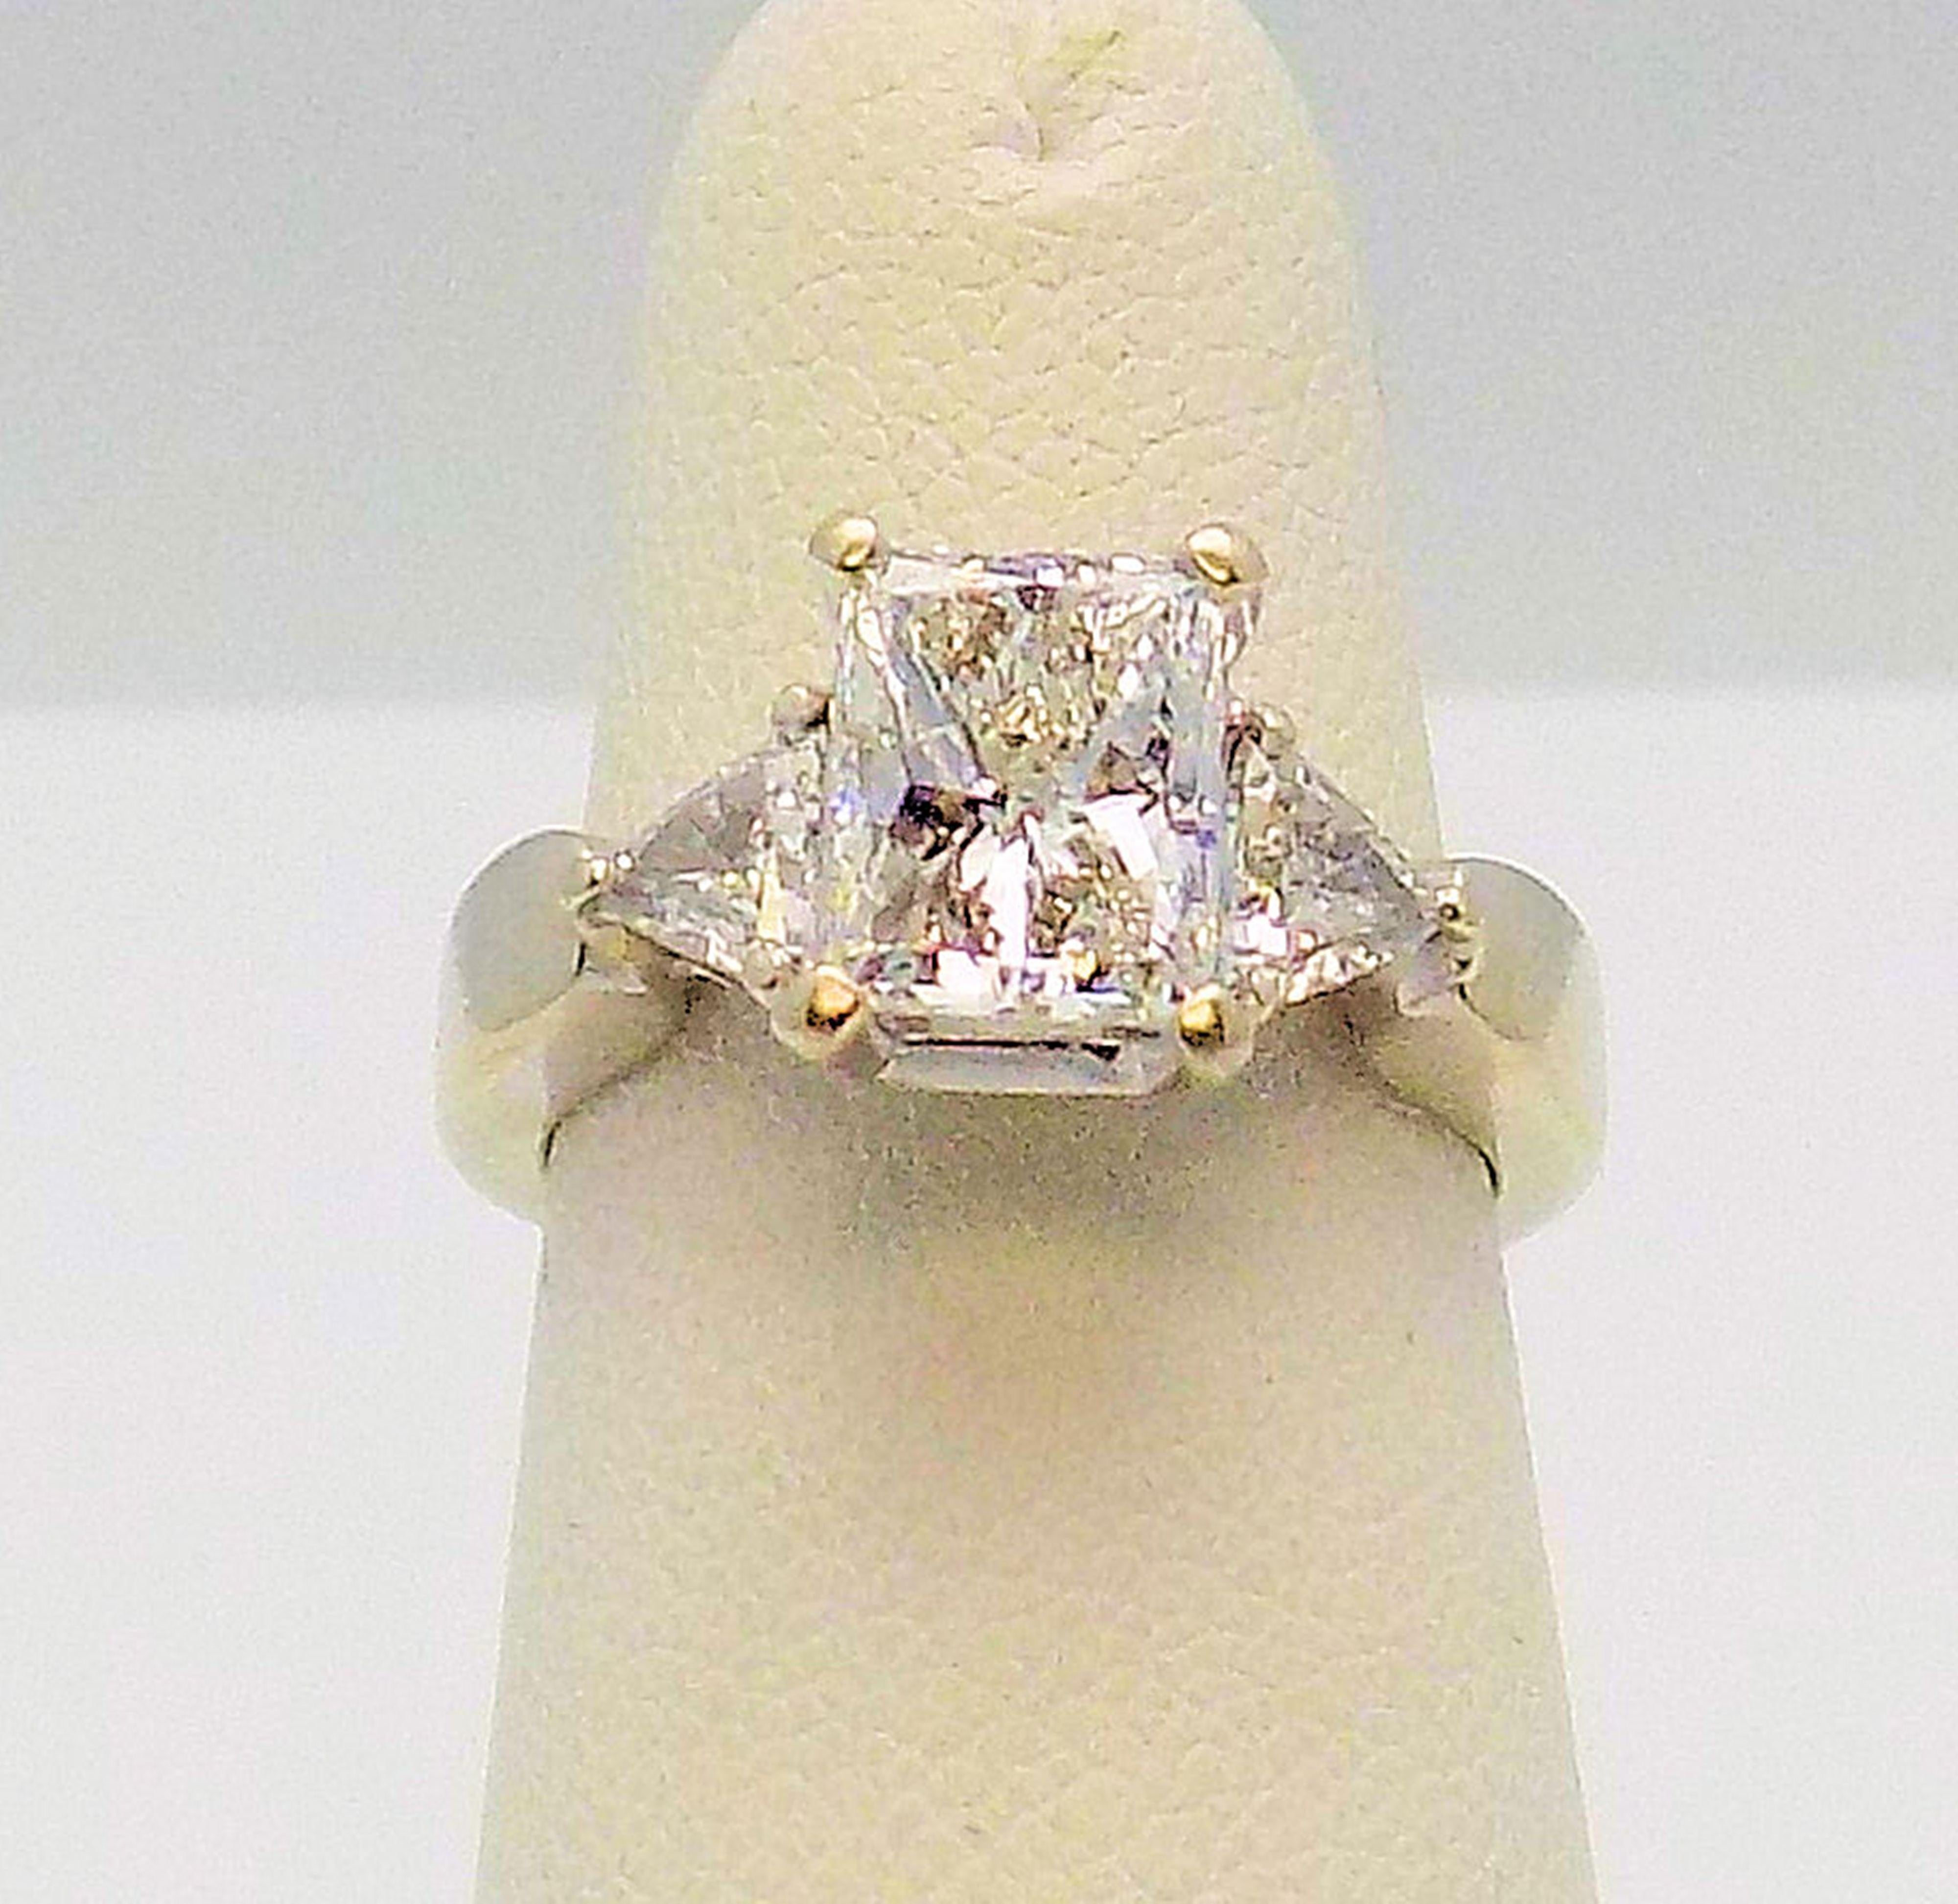 Lovely 14 Karat White Gold Engagement Ring featuring 1 Radiant Cut Diamond 1.52 Carat SI-2, I, and 2 Trilliant Cut Diamonds 0.46 Carat Total Weight SI, I-J. Finger Size 5; 3.2 DWT or 4.98 Grams.

The Jewelry Gallery offers ring sizing (at additional